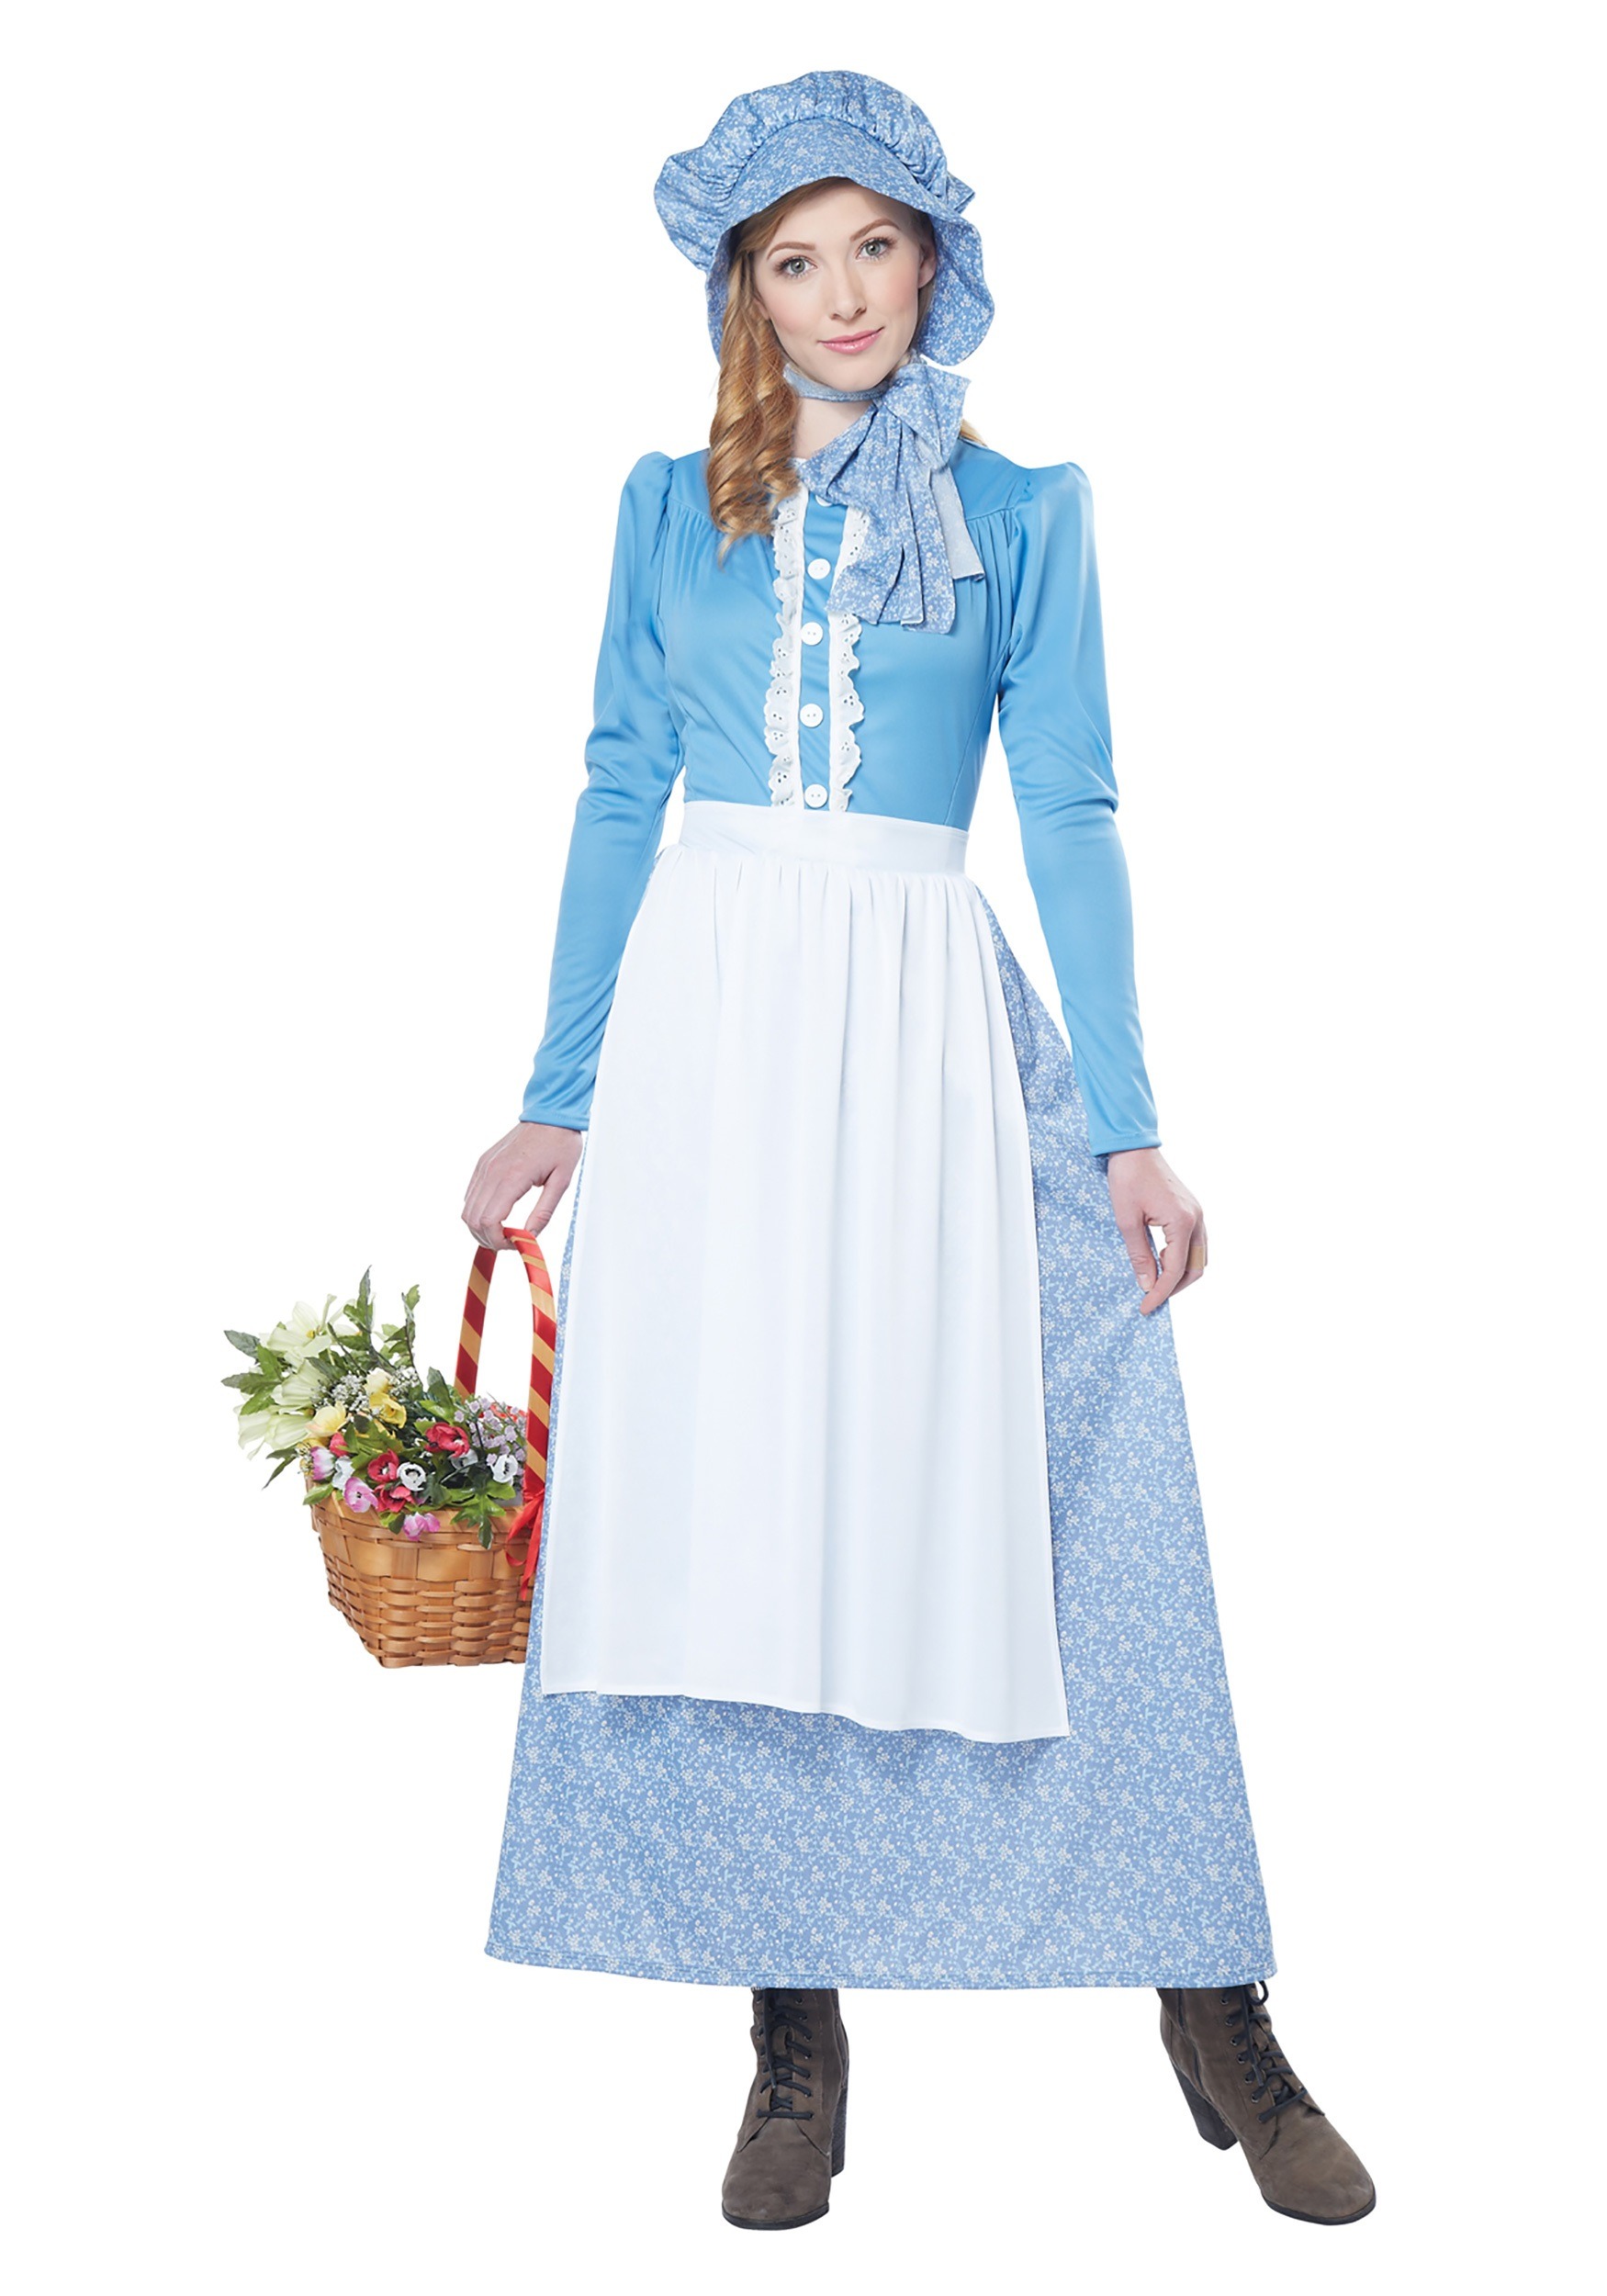 Historical Costumes - Adult, Kids Historical Halloween Costumes